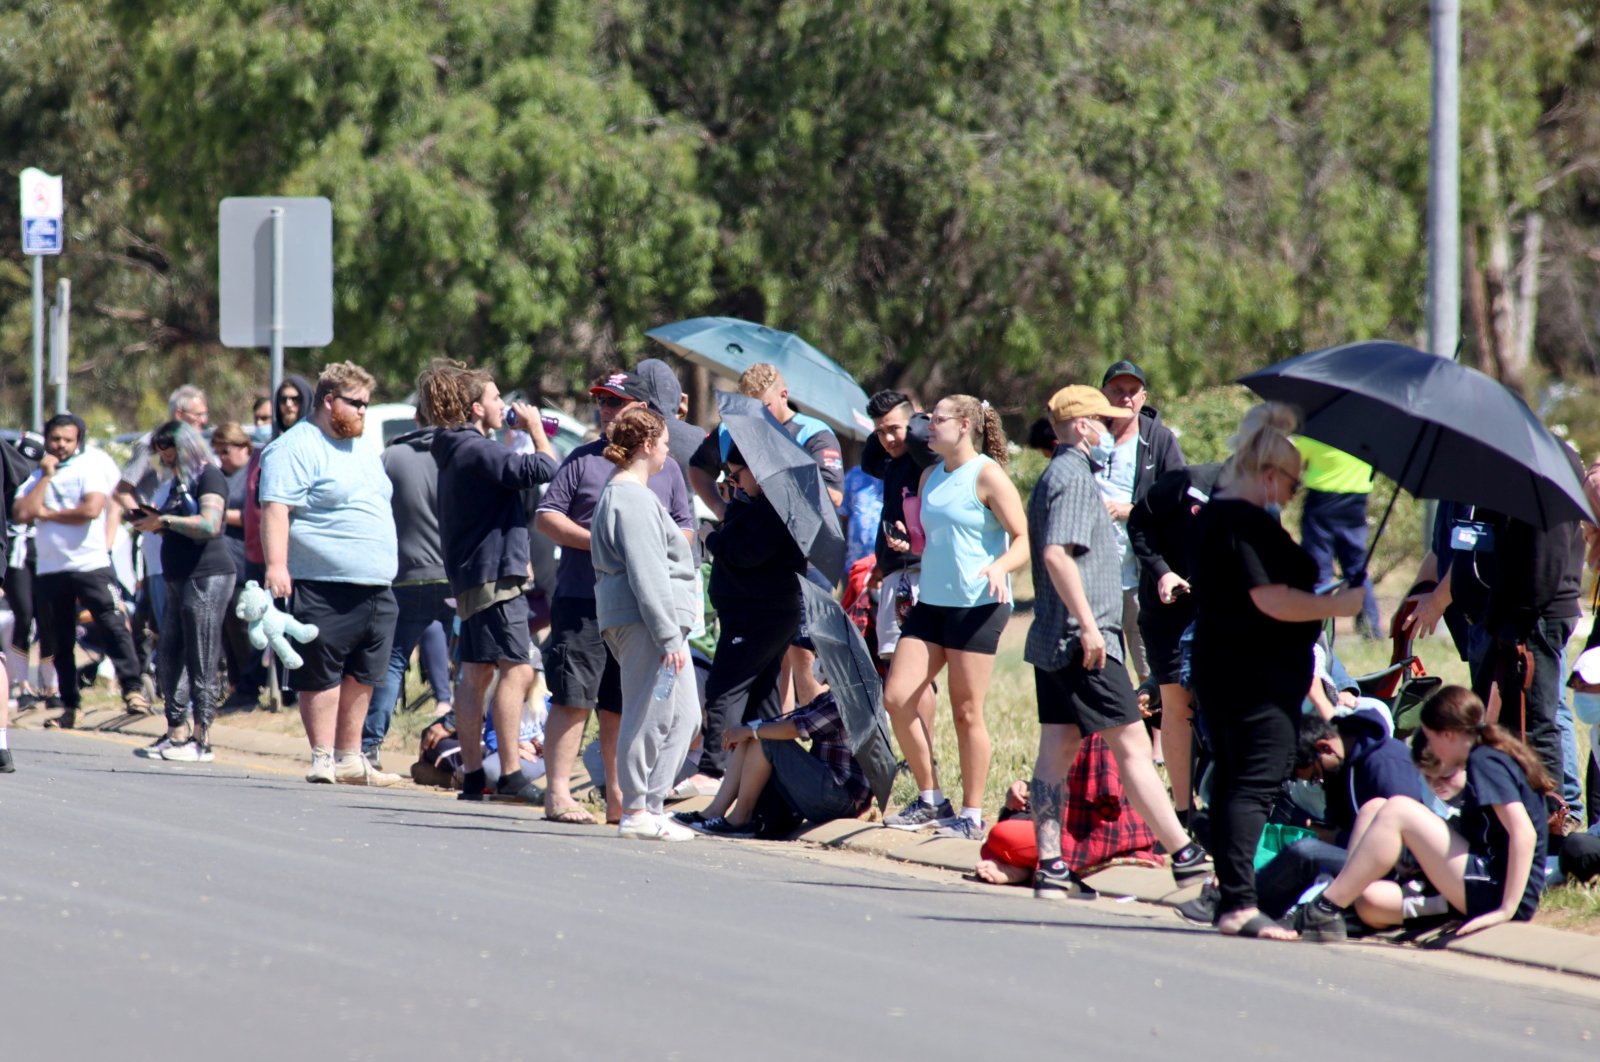 People queue up at a coronavirus disease (COVID-19) testing center as the state of South Australia experiences an outbreak in Adelaide, Australia, Nov. 17, 2020. (AP Image)